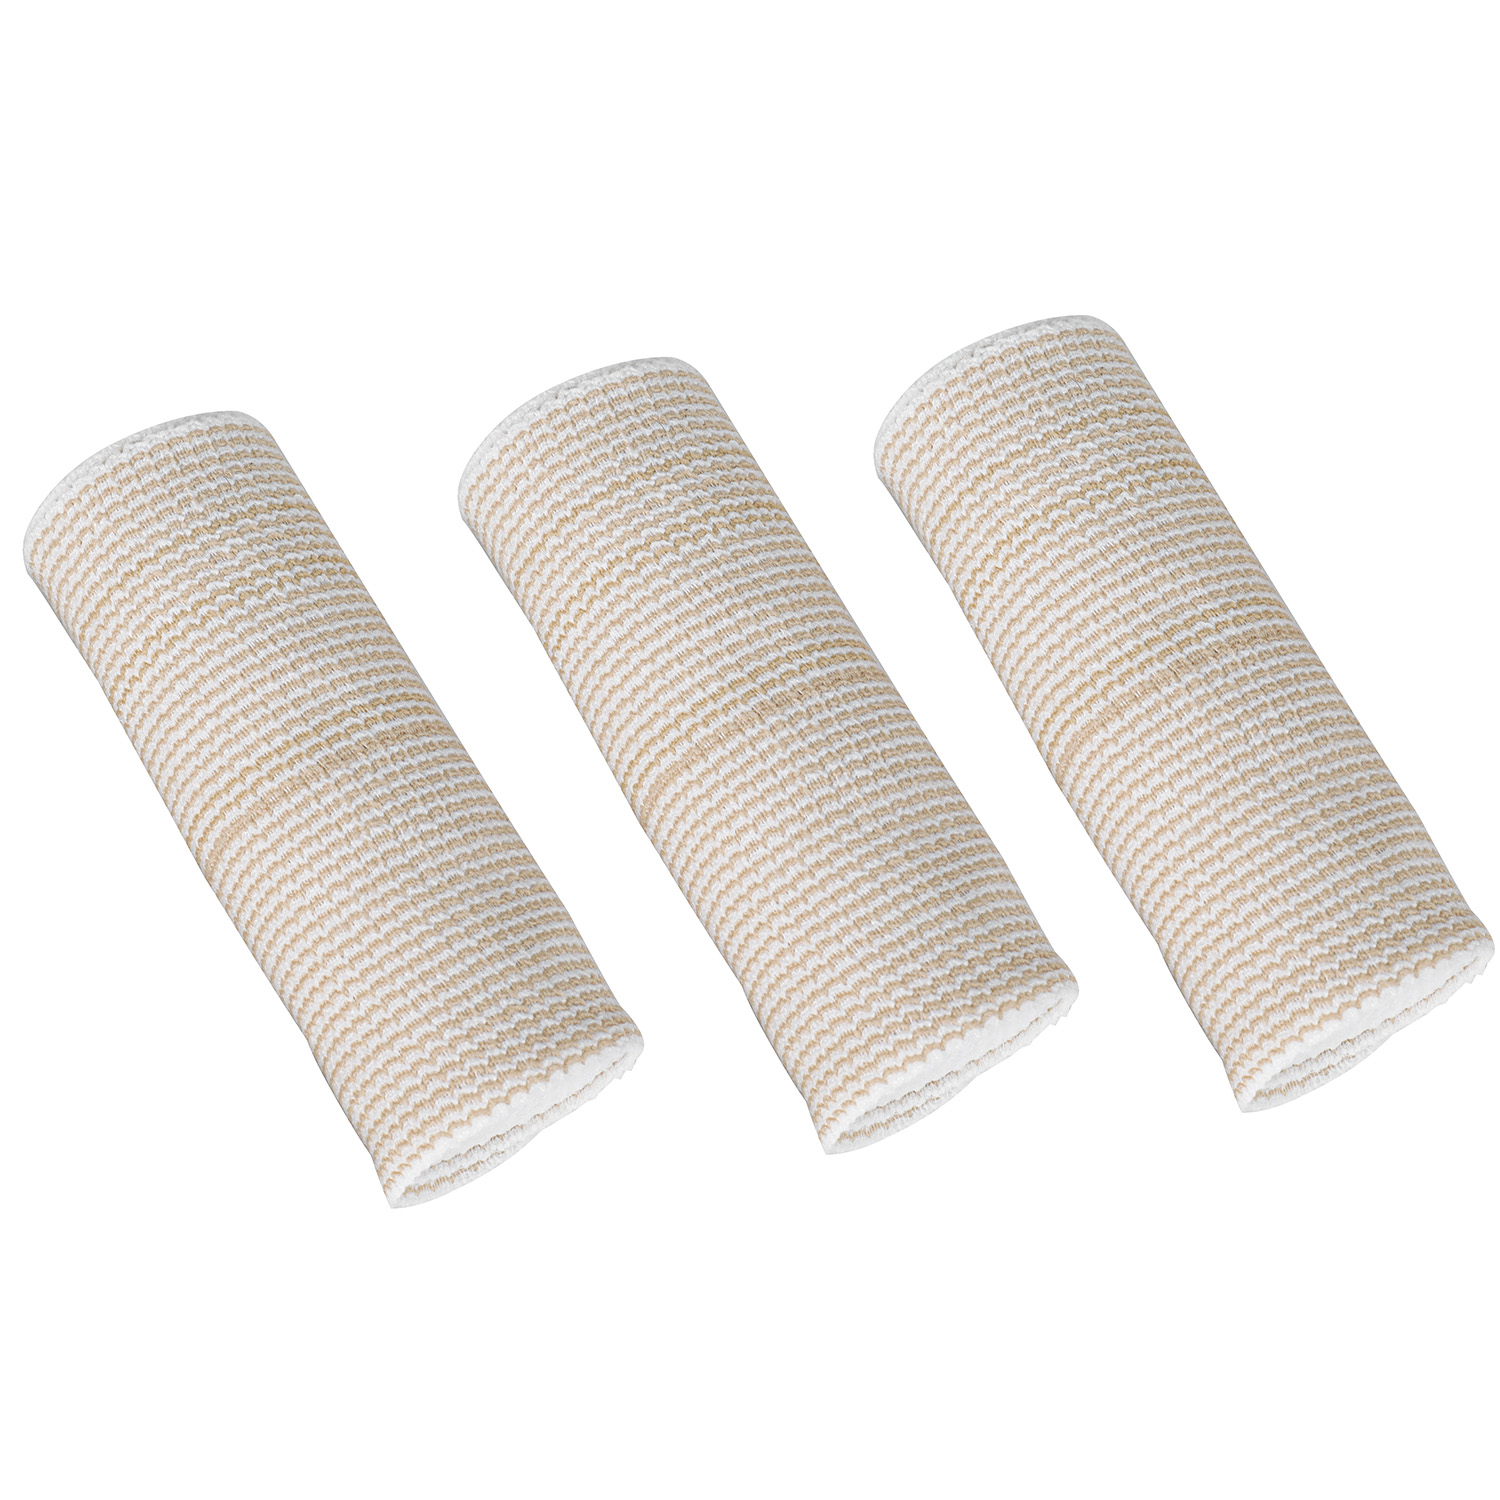 Everything You Need to Know About High Elastic Bandages in the Medical Tape Industry